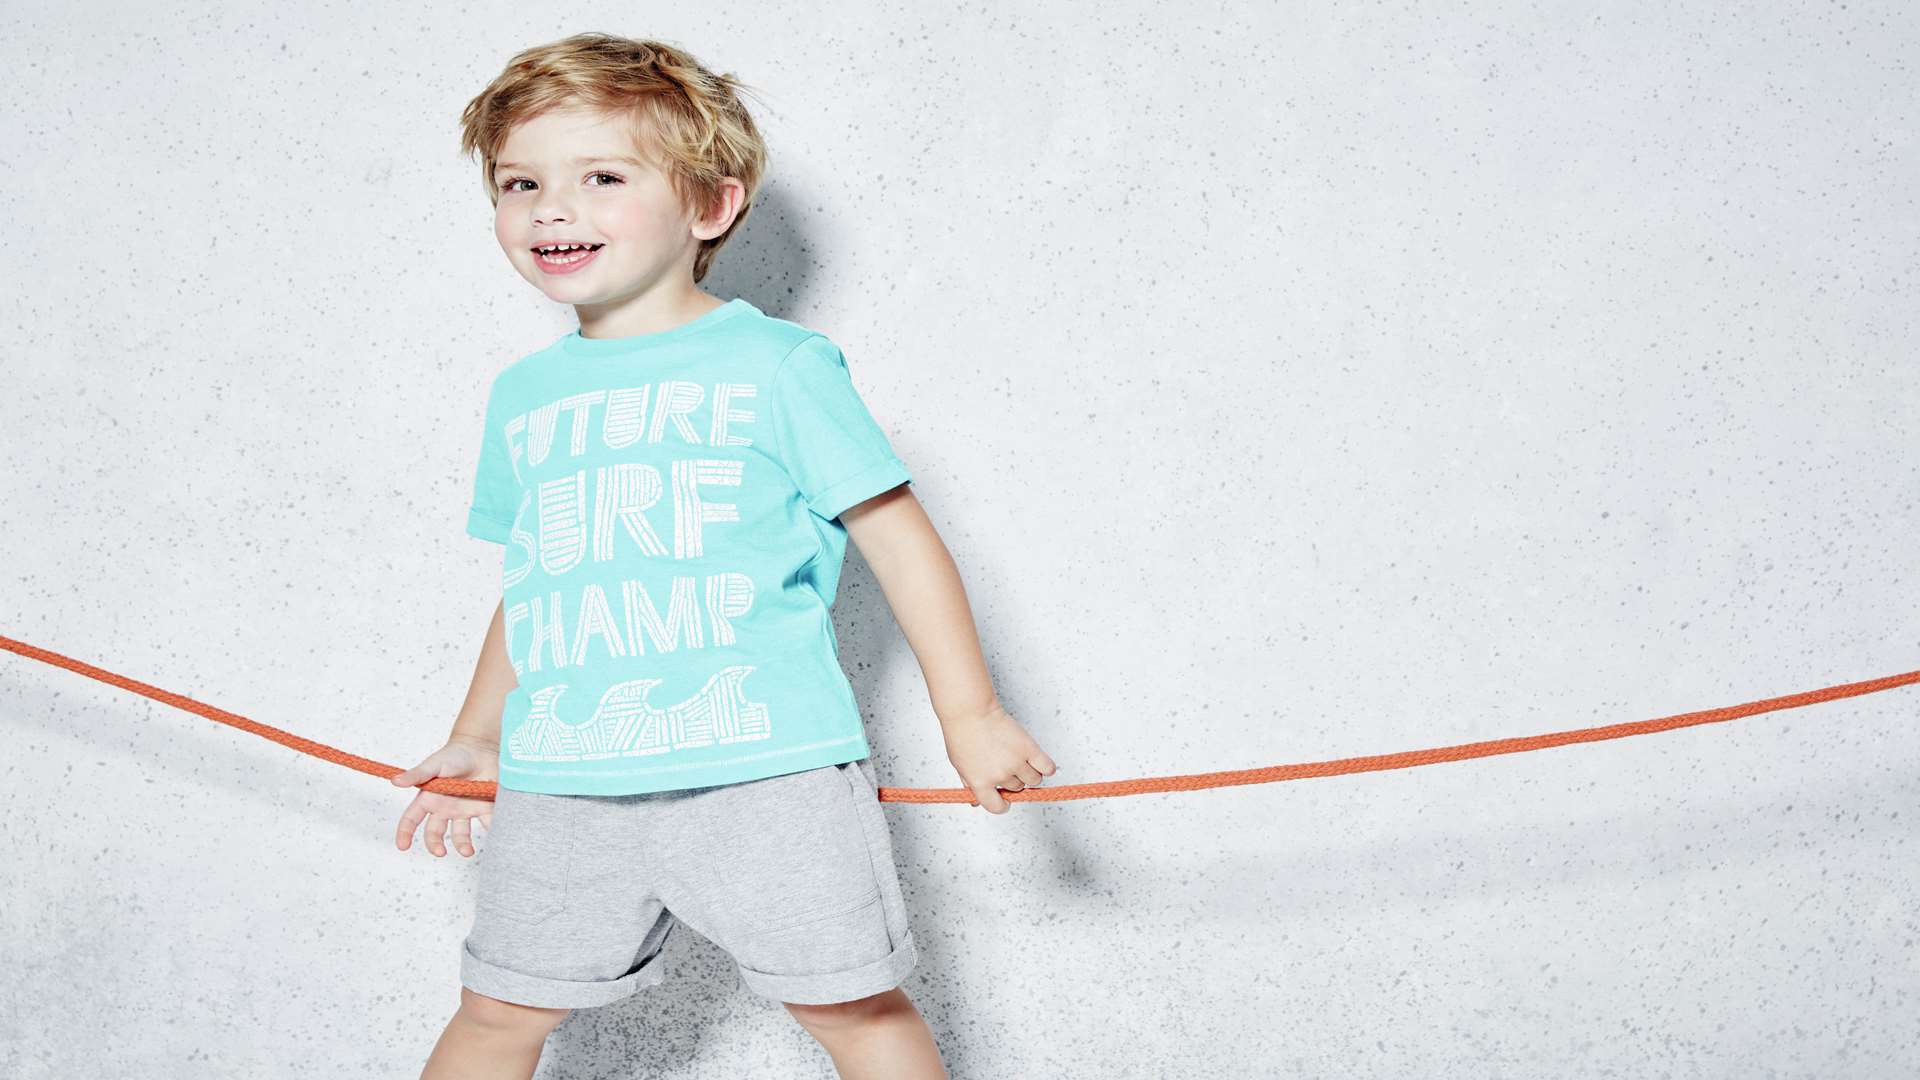 Surf champ short set from £4 at F&F for Tesco